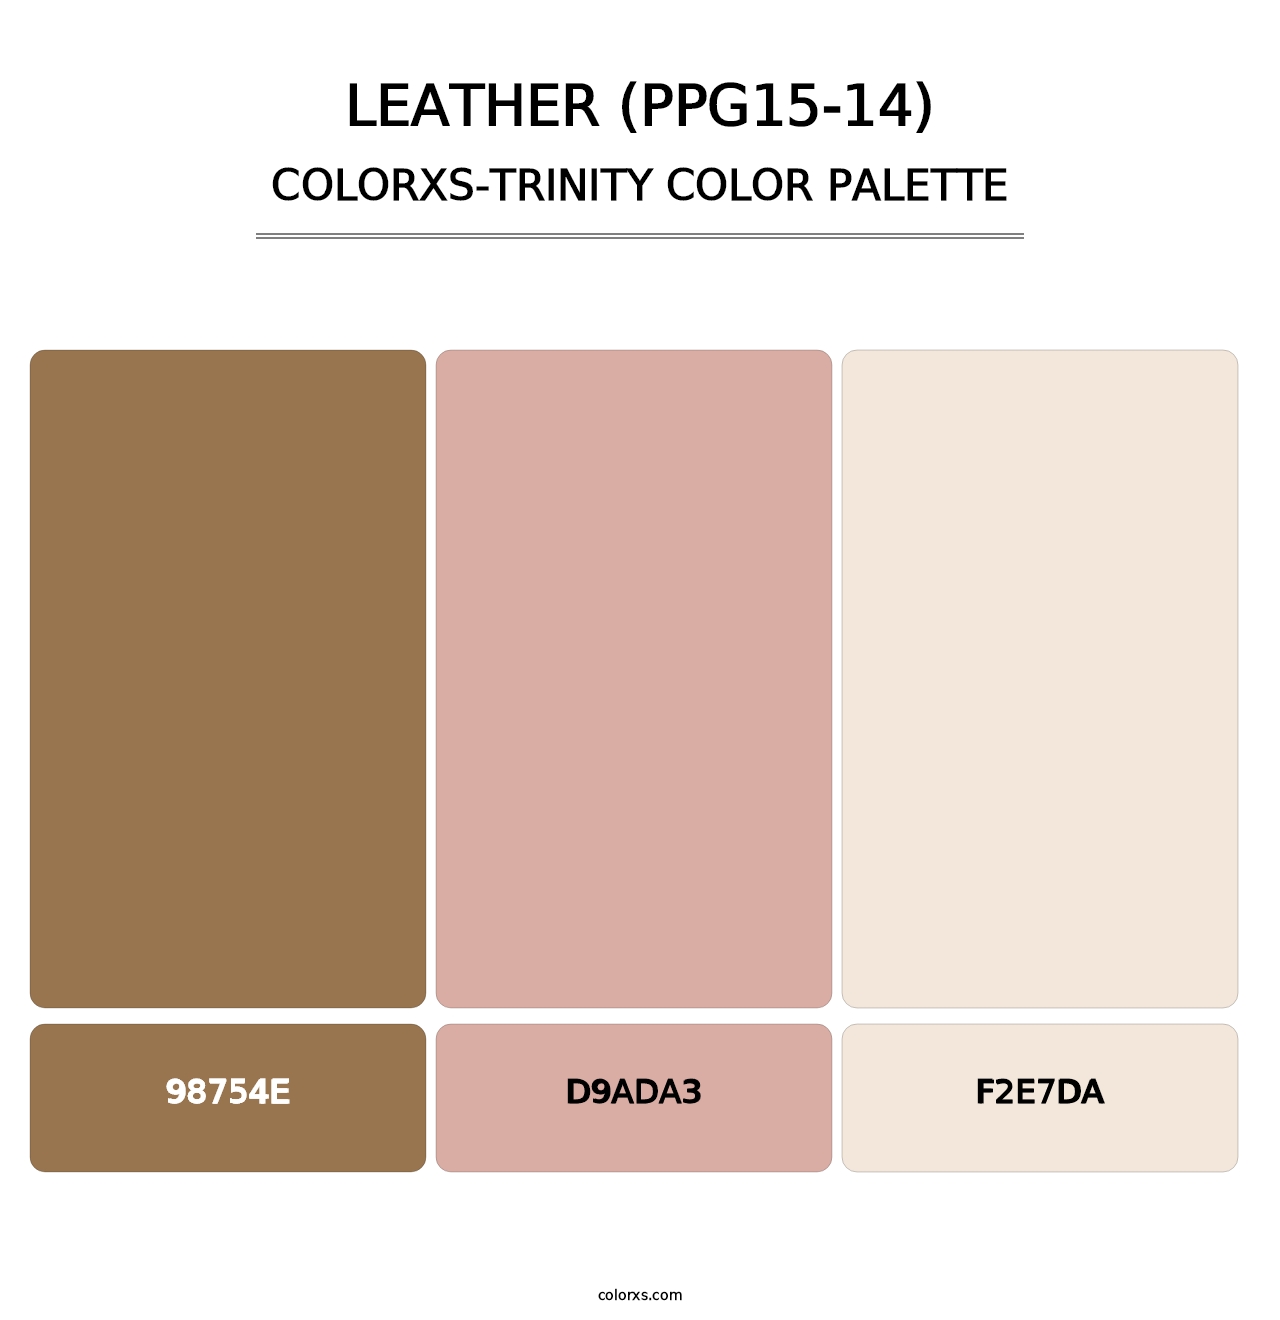 Leather (PPG15-14) - Colorxs Trinity Palette